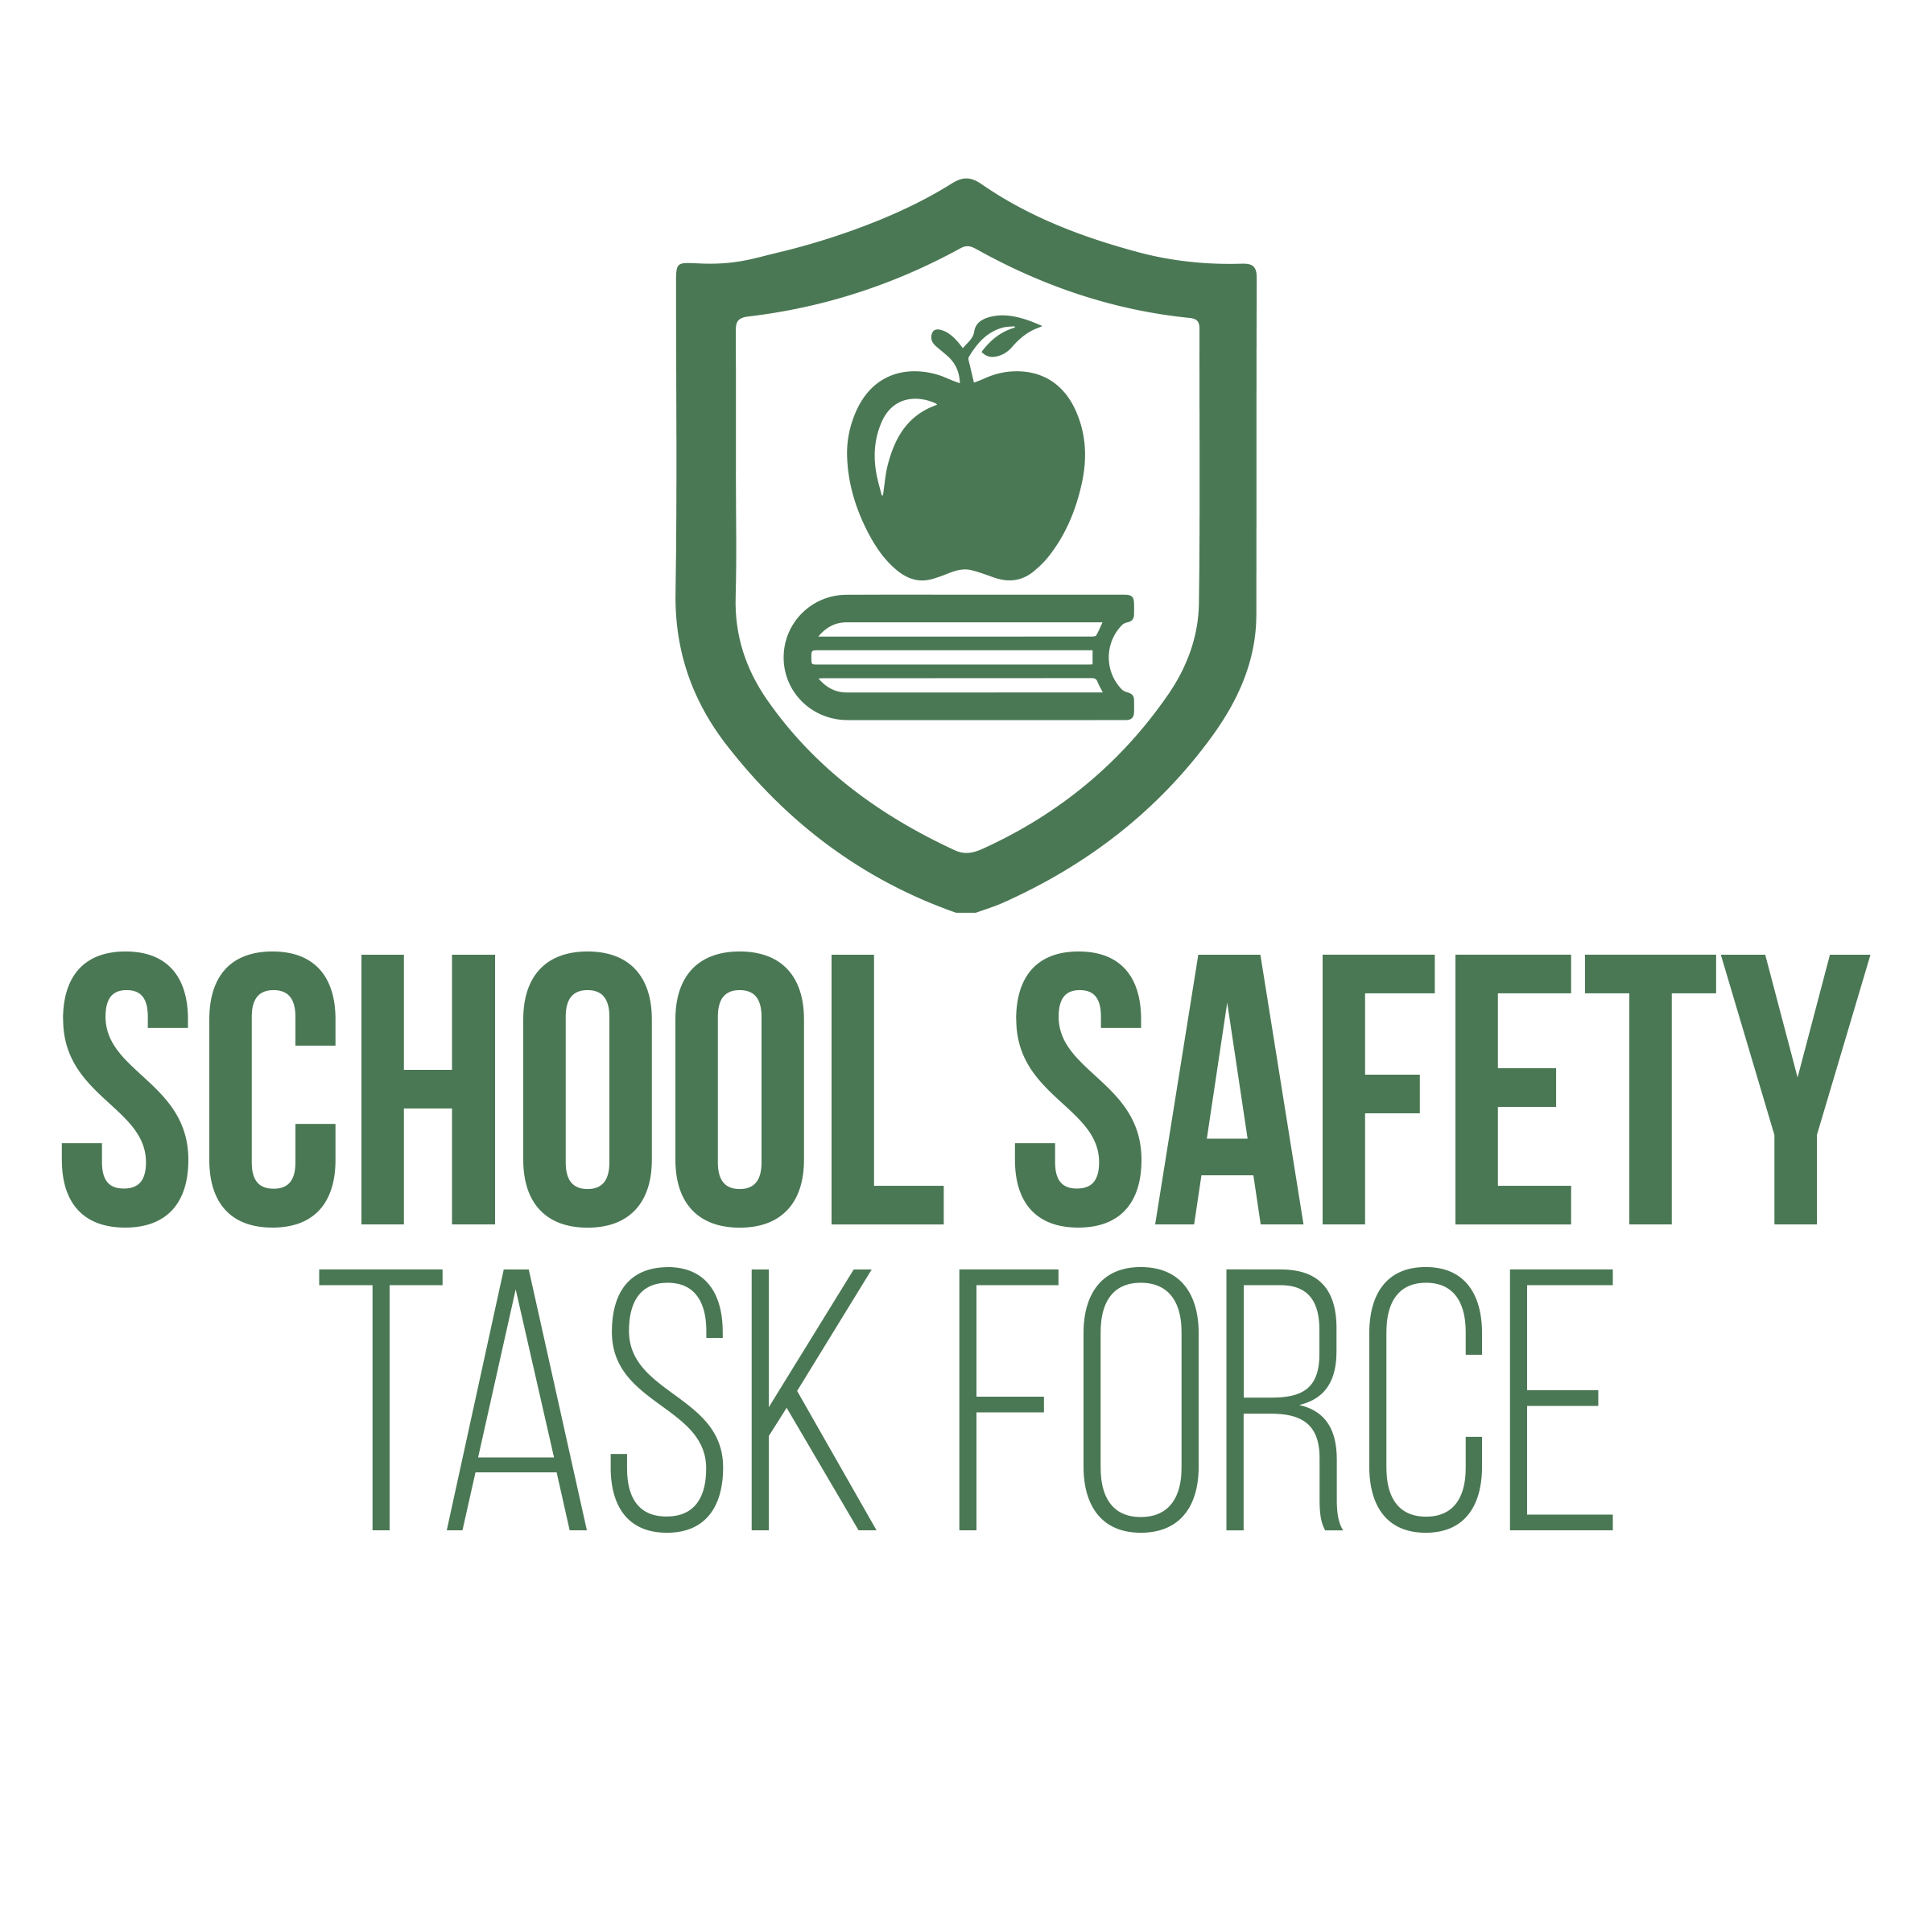 School Safety Task Force